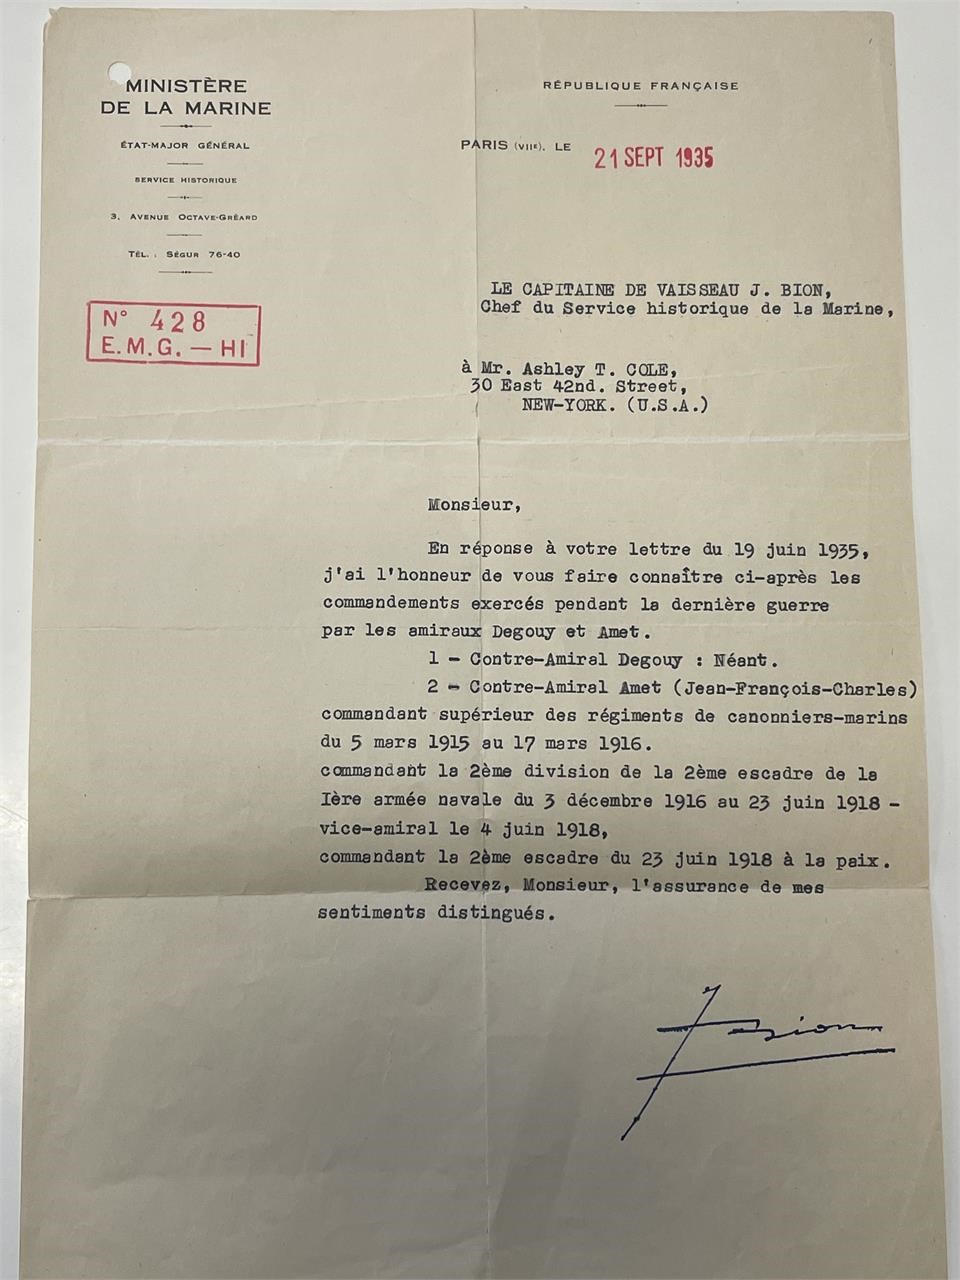 1935 French republic letter